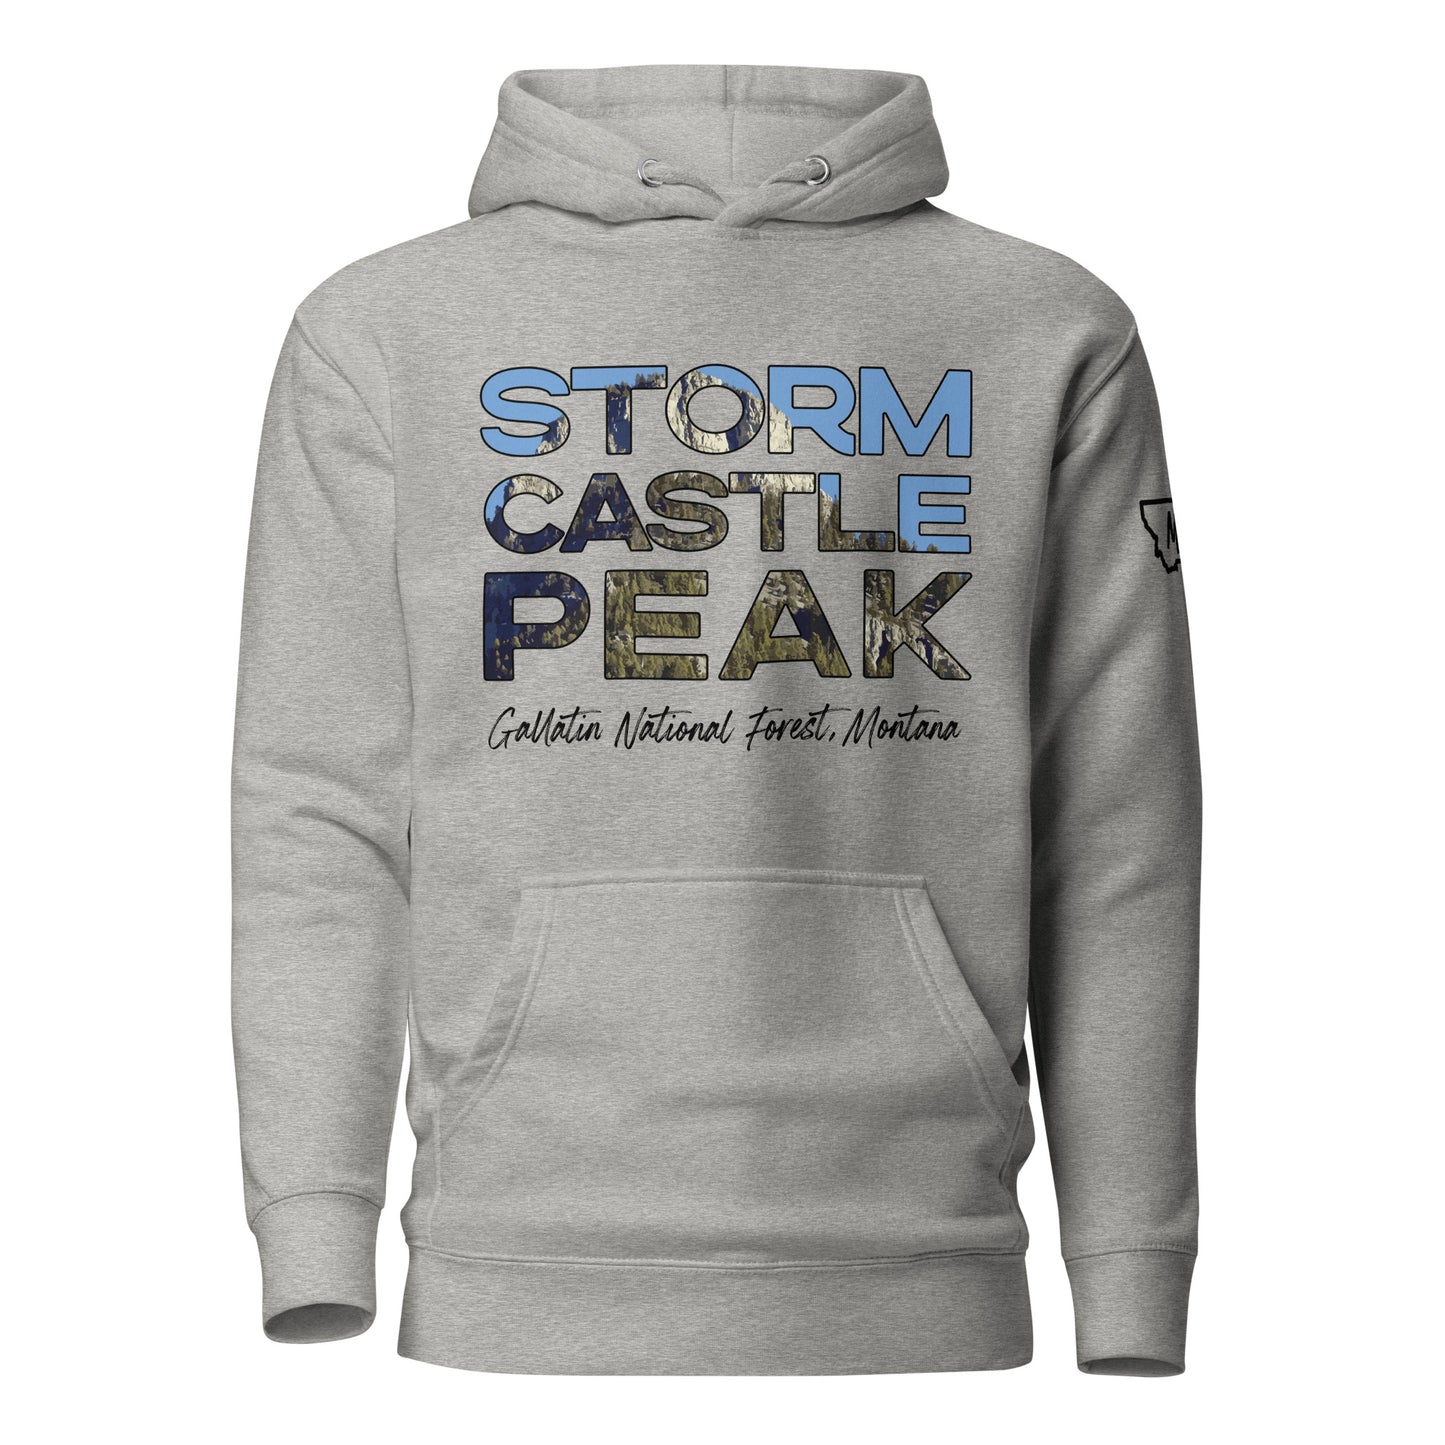 Front view of Storm Castle Peak in Custer Gallatin National Forest Montana Carbon Grey Hoodie from Park Attire